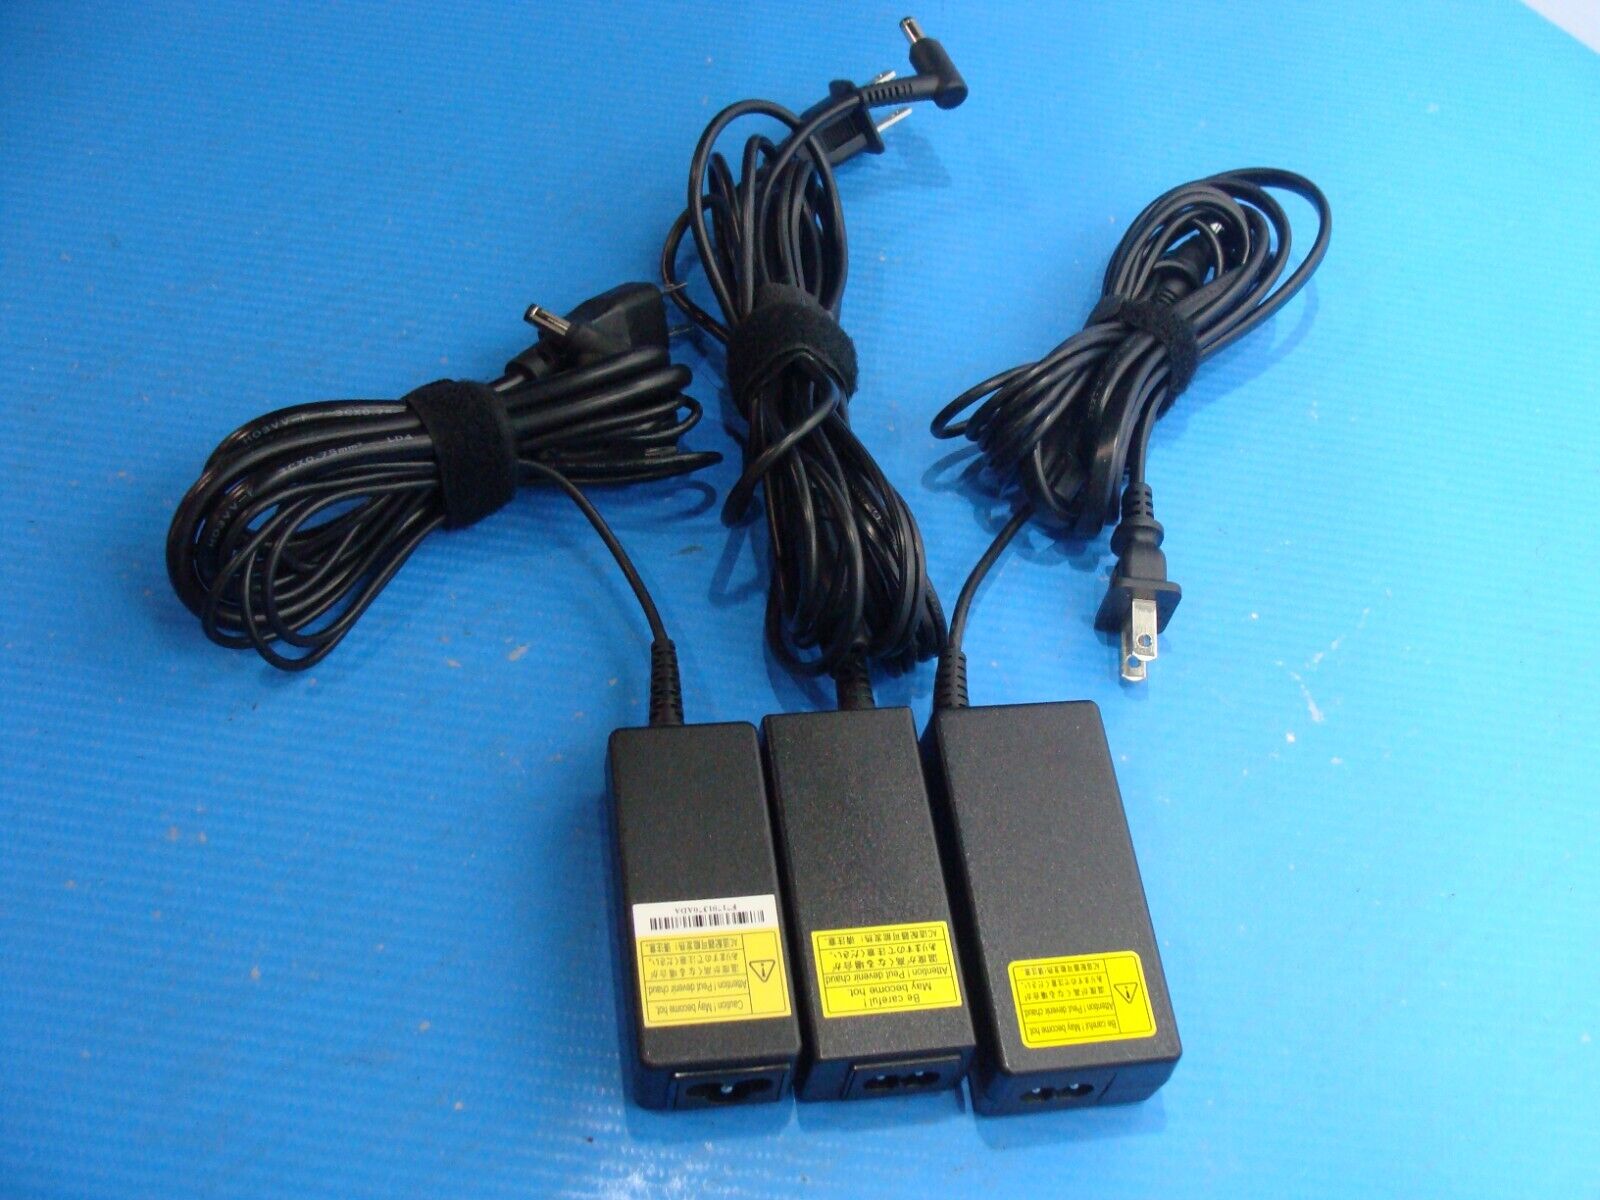 Genuine OEM Toshiba 45W 2.37A 19V AC Adapter Charger Power Adapter  5.5*2.5mm